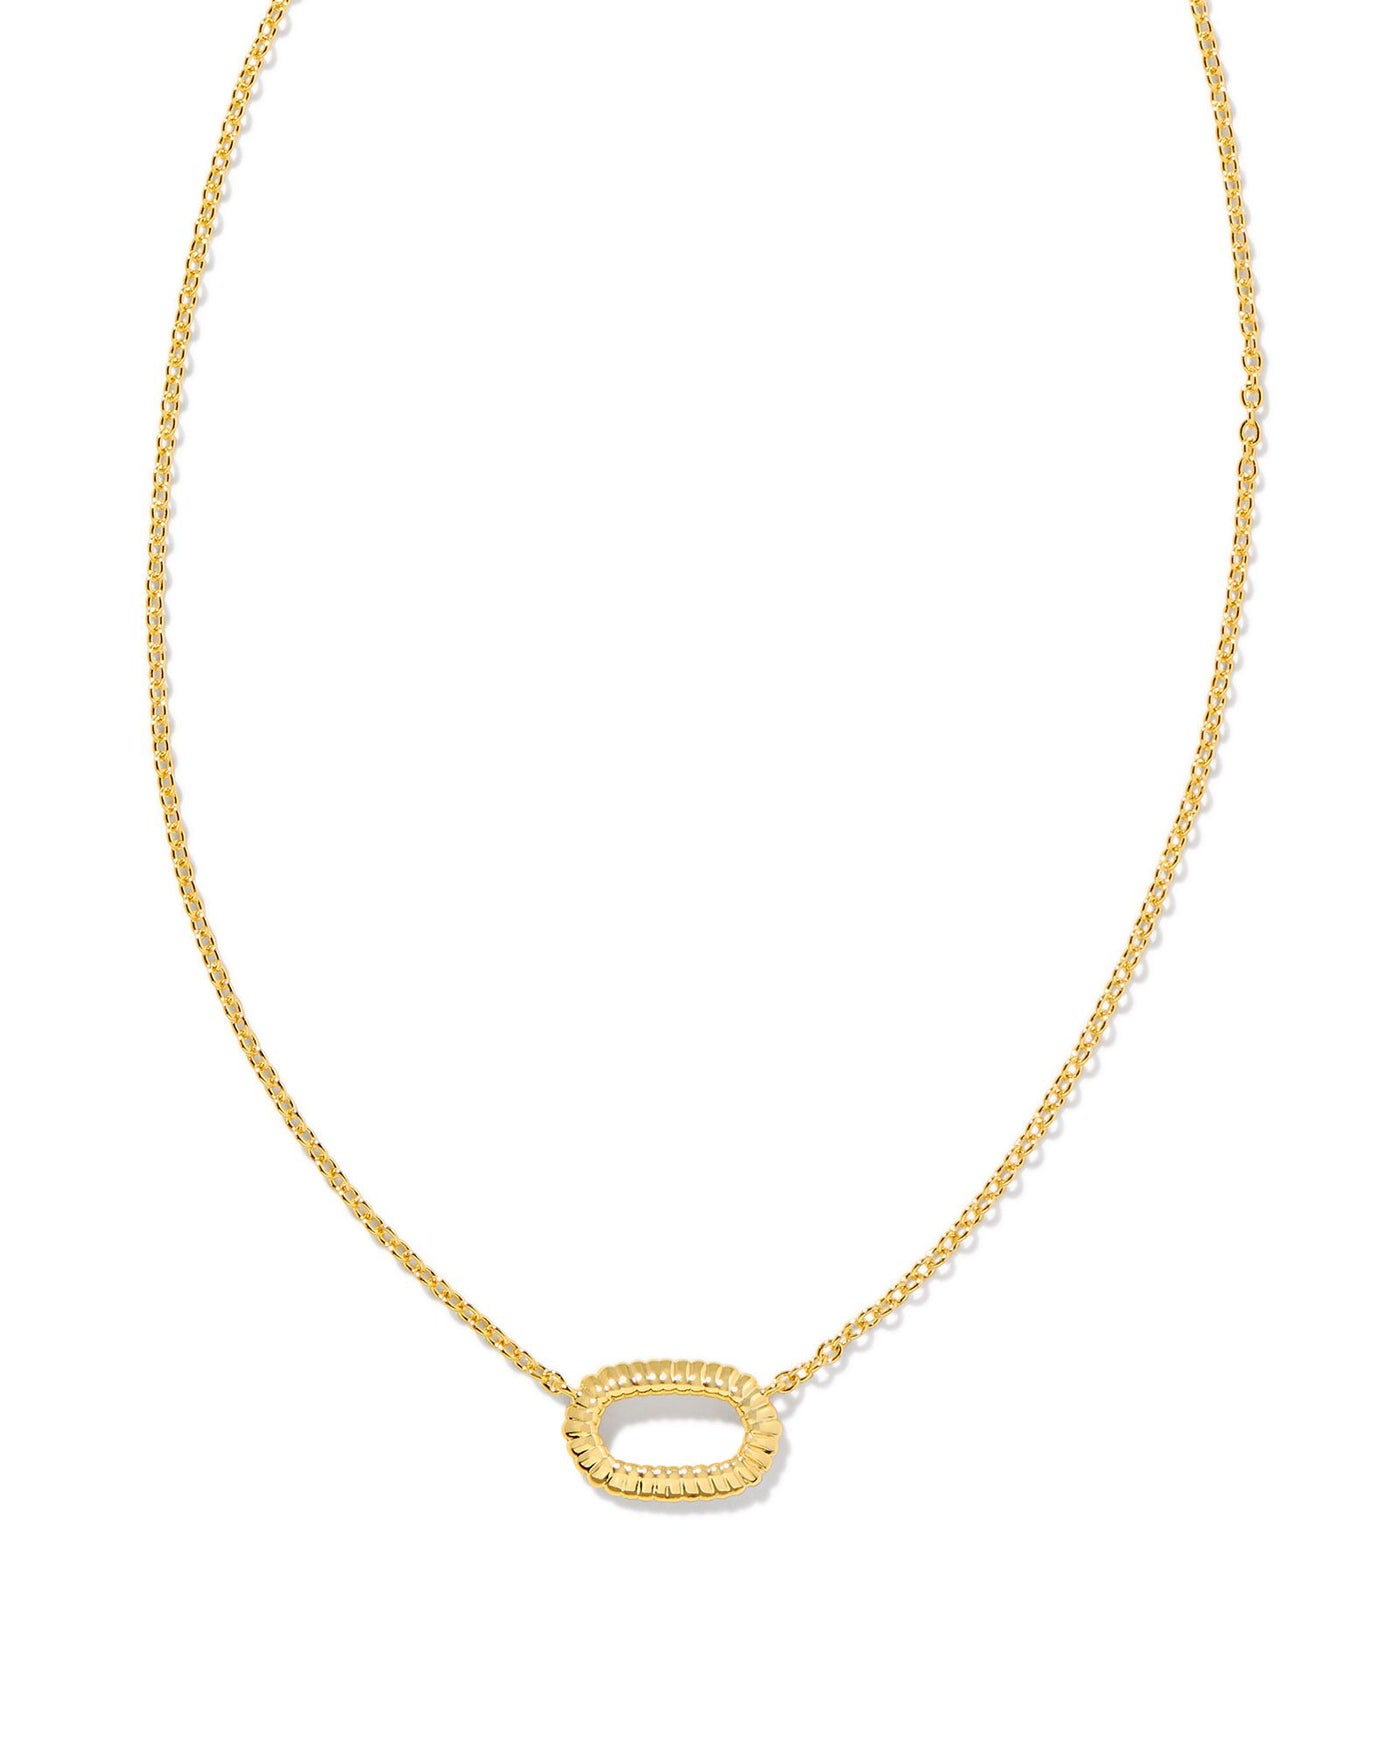 Kendra Scott Elisa Ridge Open Frame Short Pendant Necklace-Necklaces-Kendra Scott-Market Street Nest, Fashionable Clothing, Shoes and Home Décor Located in Mabank, TX